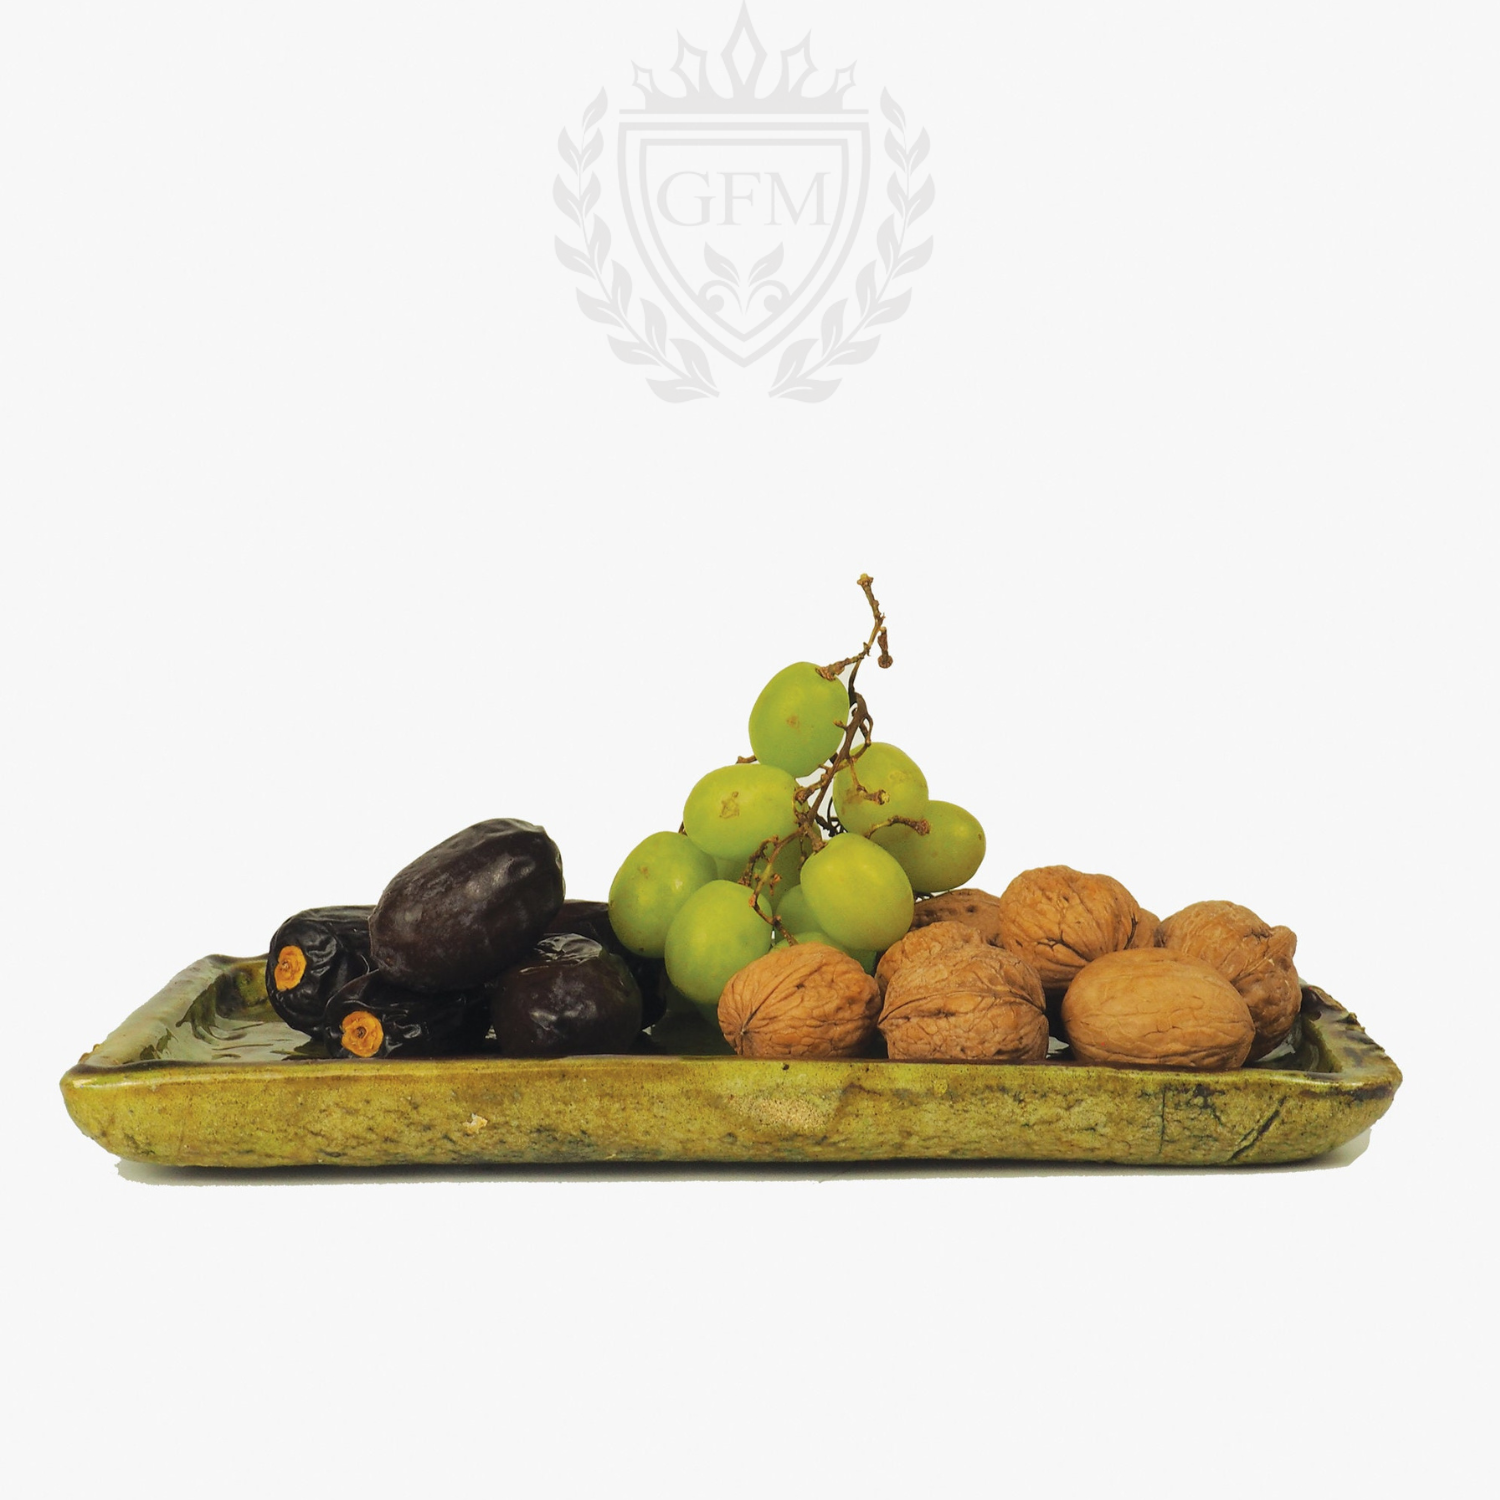 Morrocan Vintage Tamegroute Olive Green Rectangular PlateTray, Handmade Ceramic, Table Wear